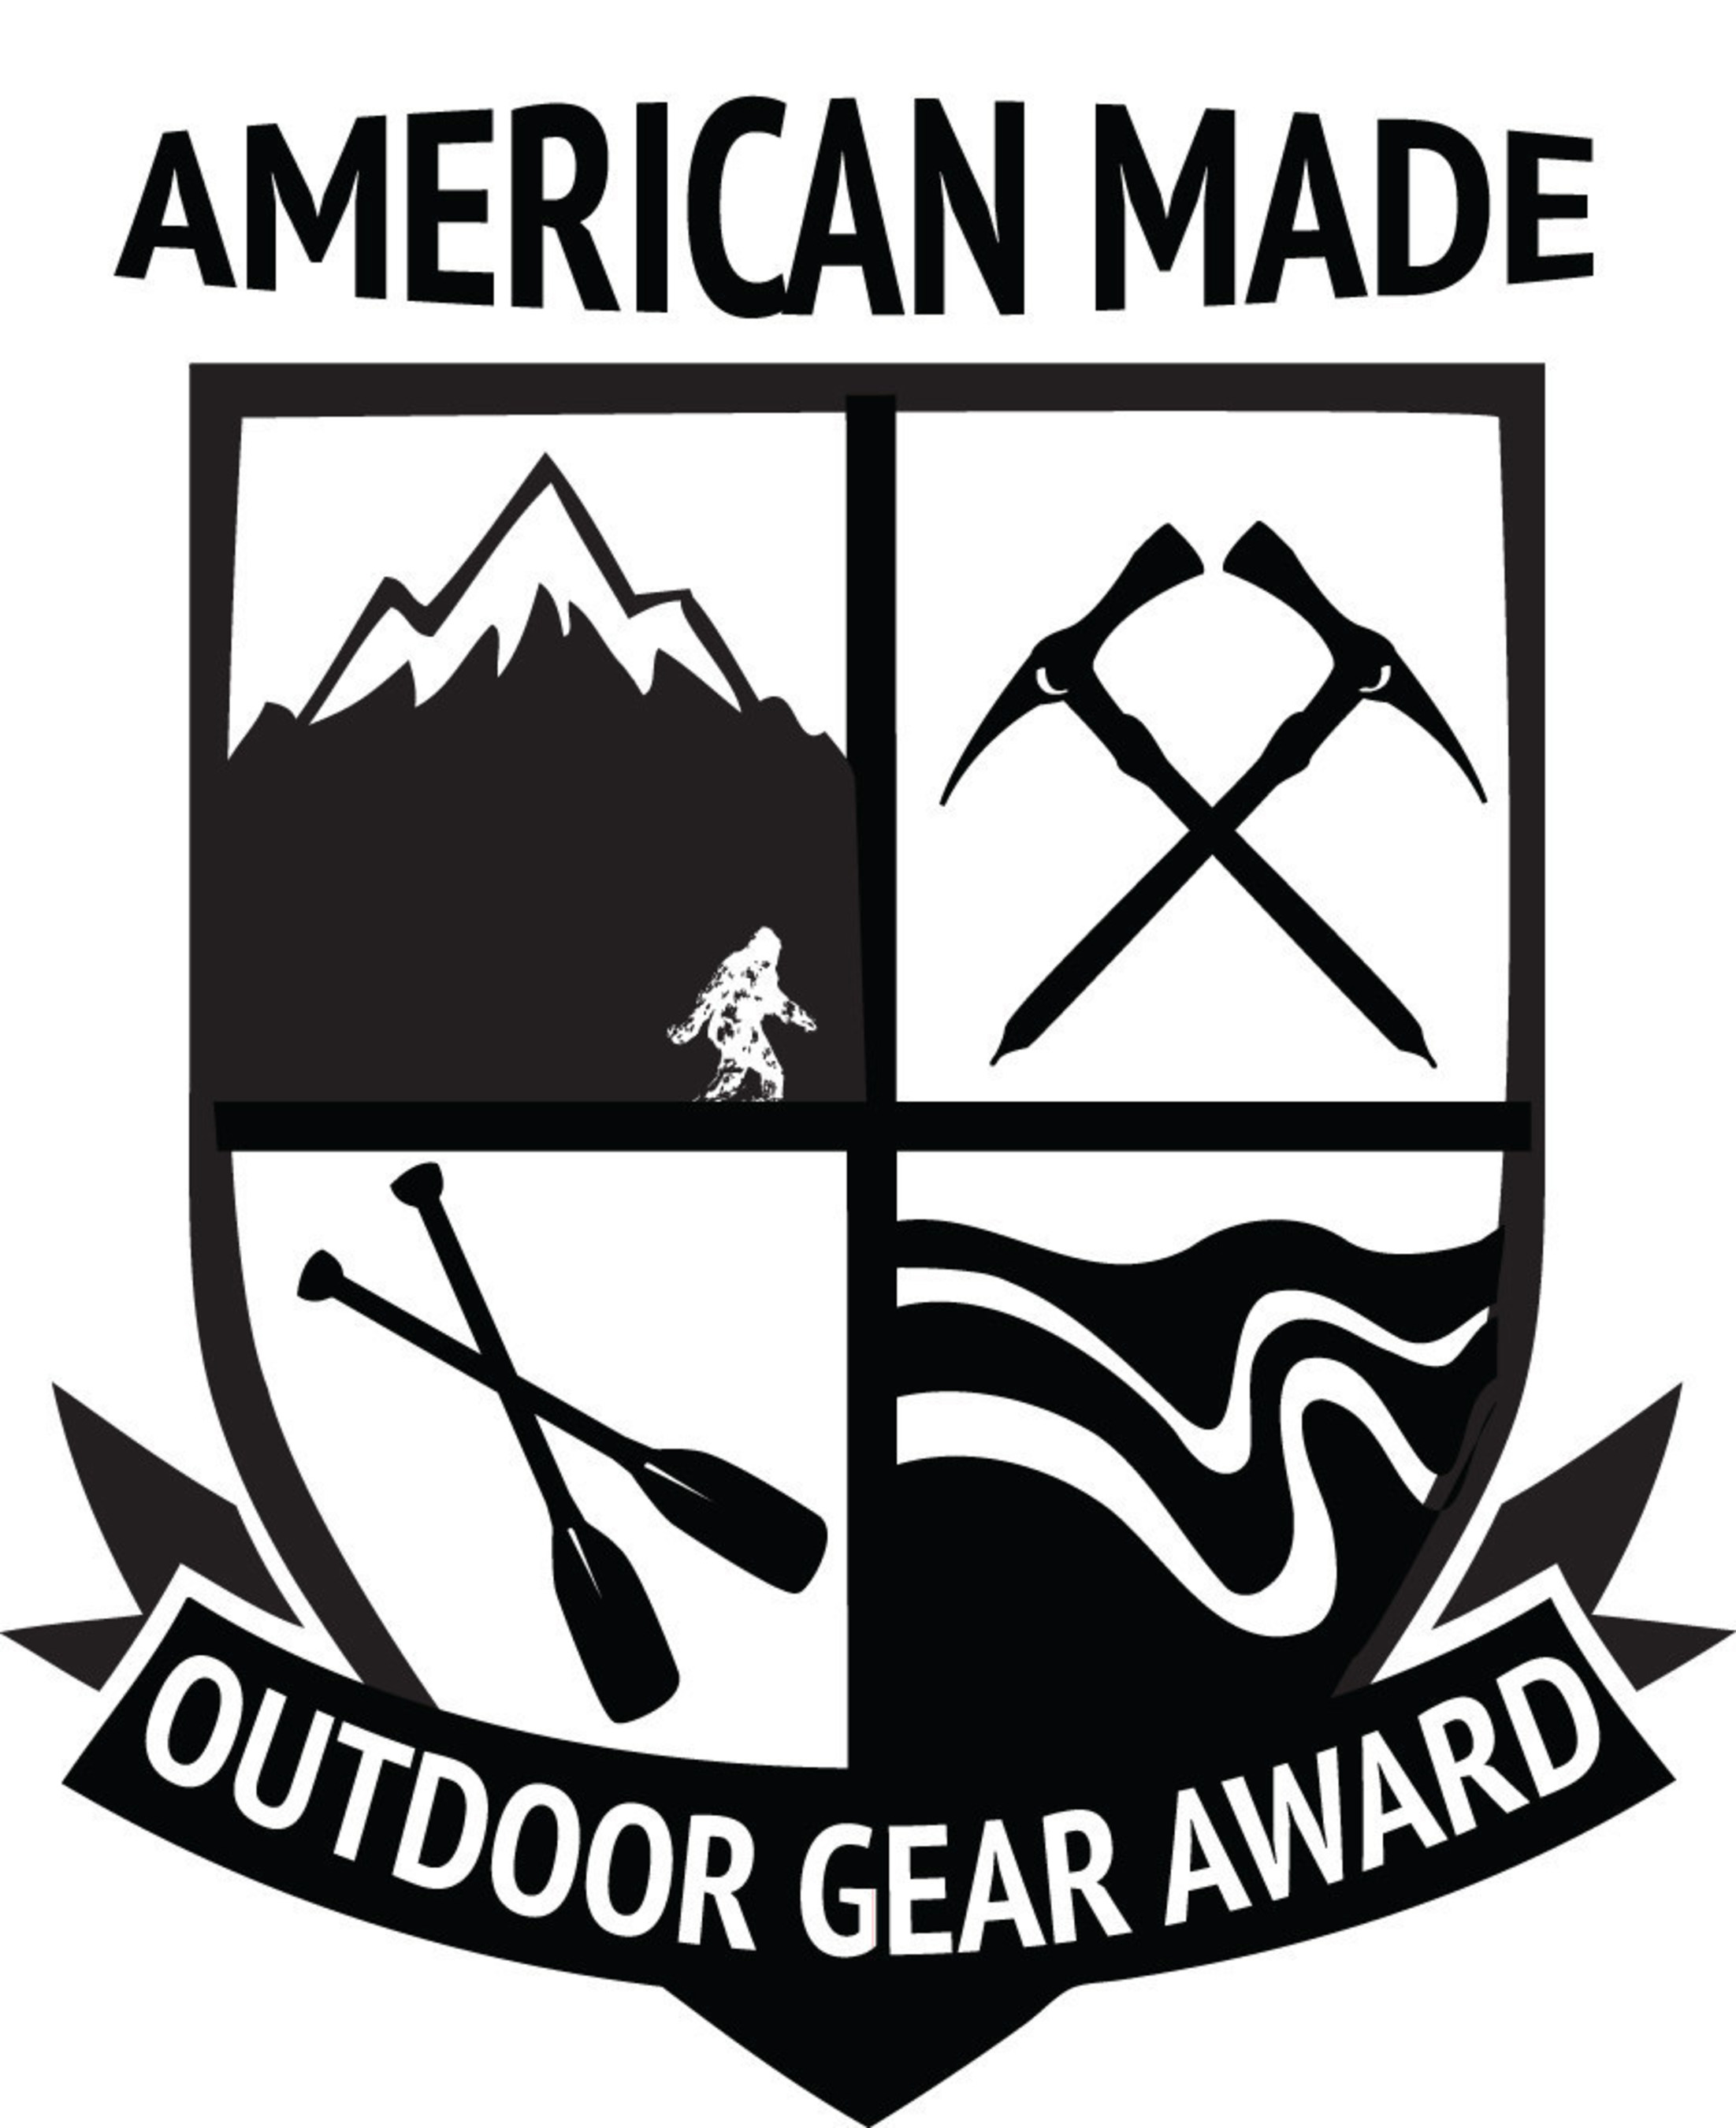 The American Made Outdoor Gear Award annually celebrates the stories of companies with a commitment to American manufacturing and sourcing in the outdoor market.